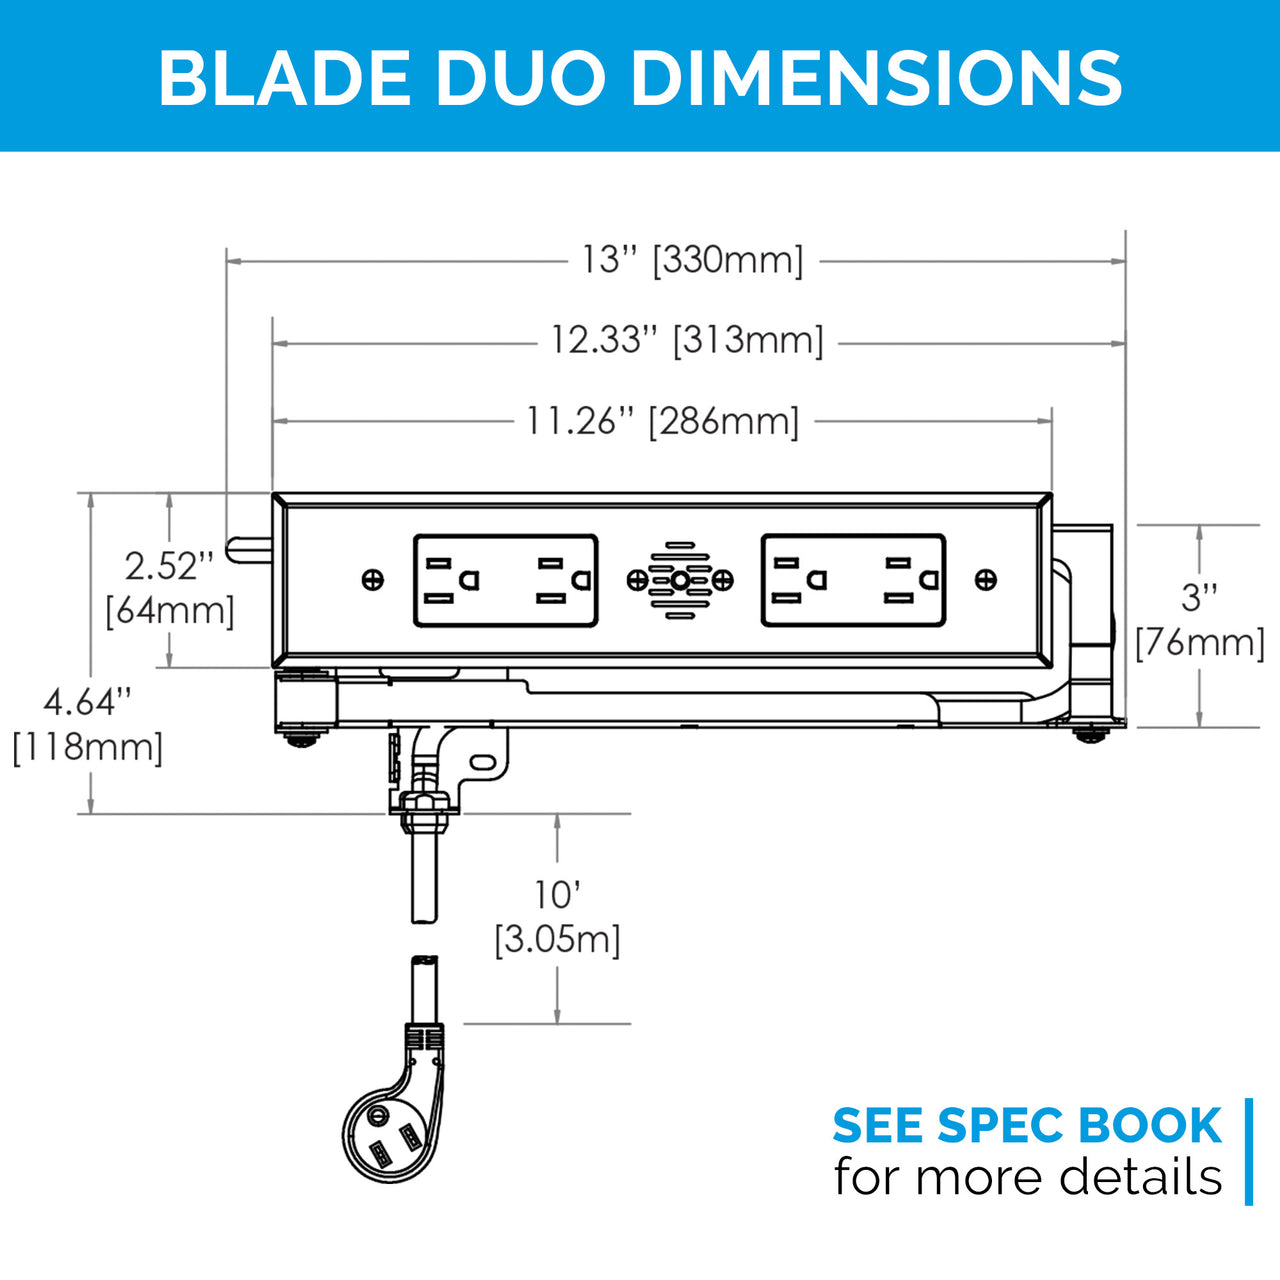 15 amp Blade Series with 10' Cords